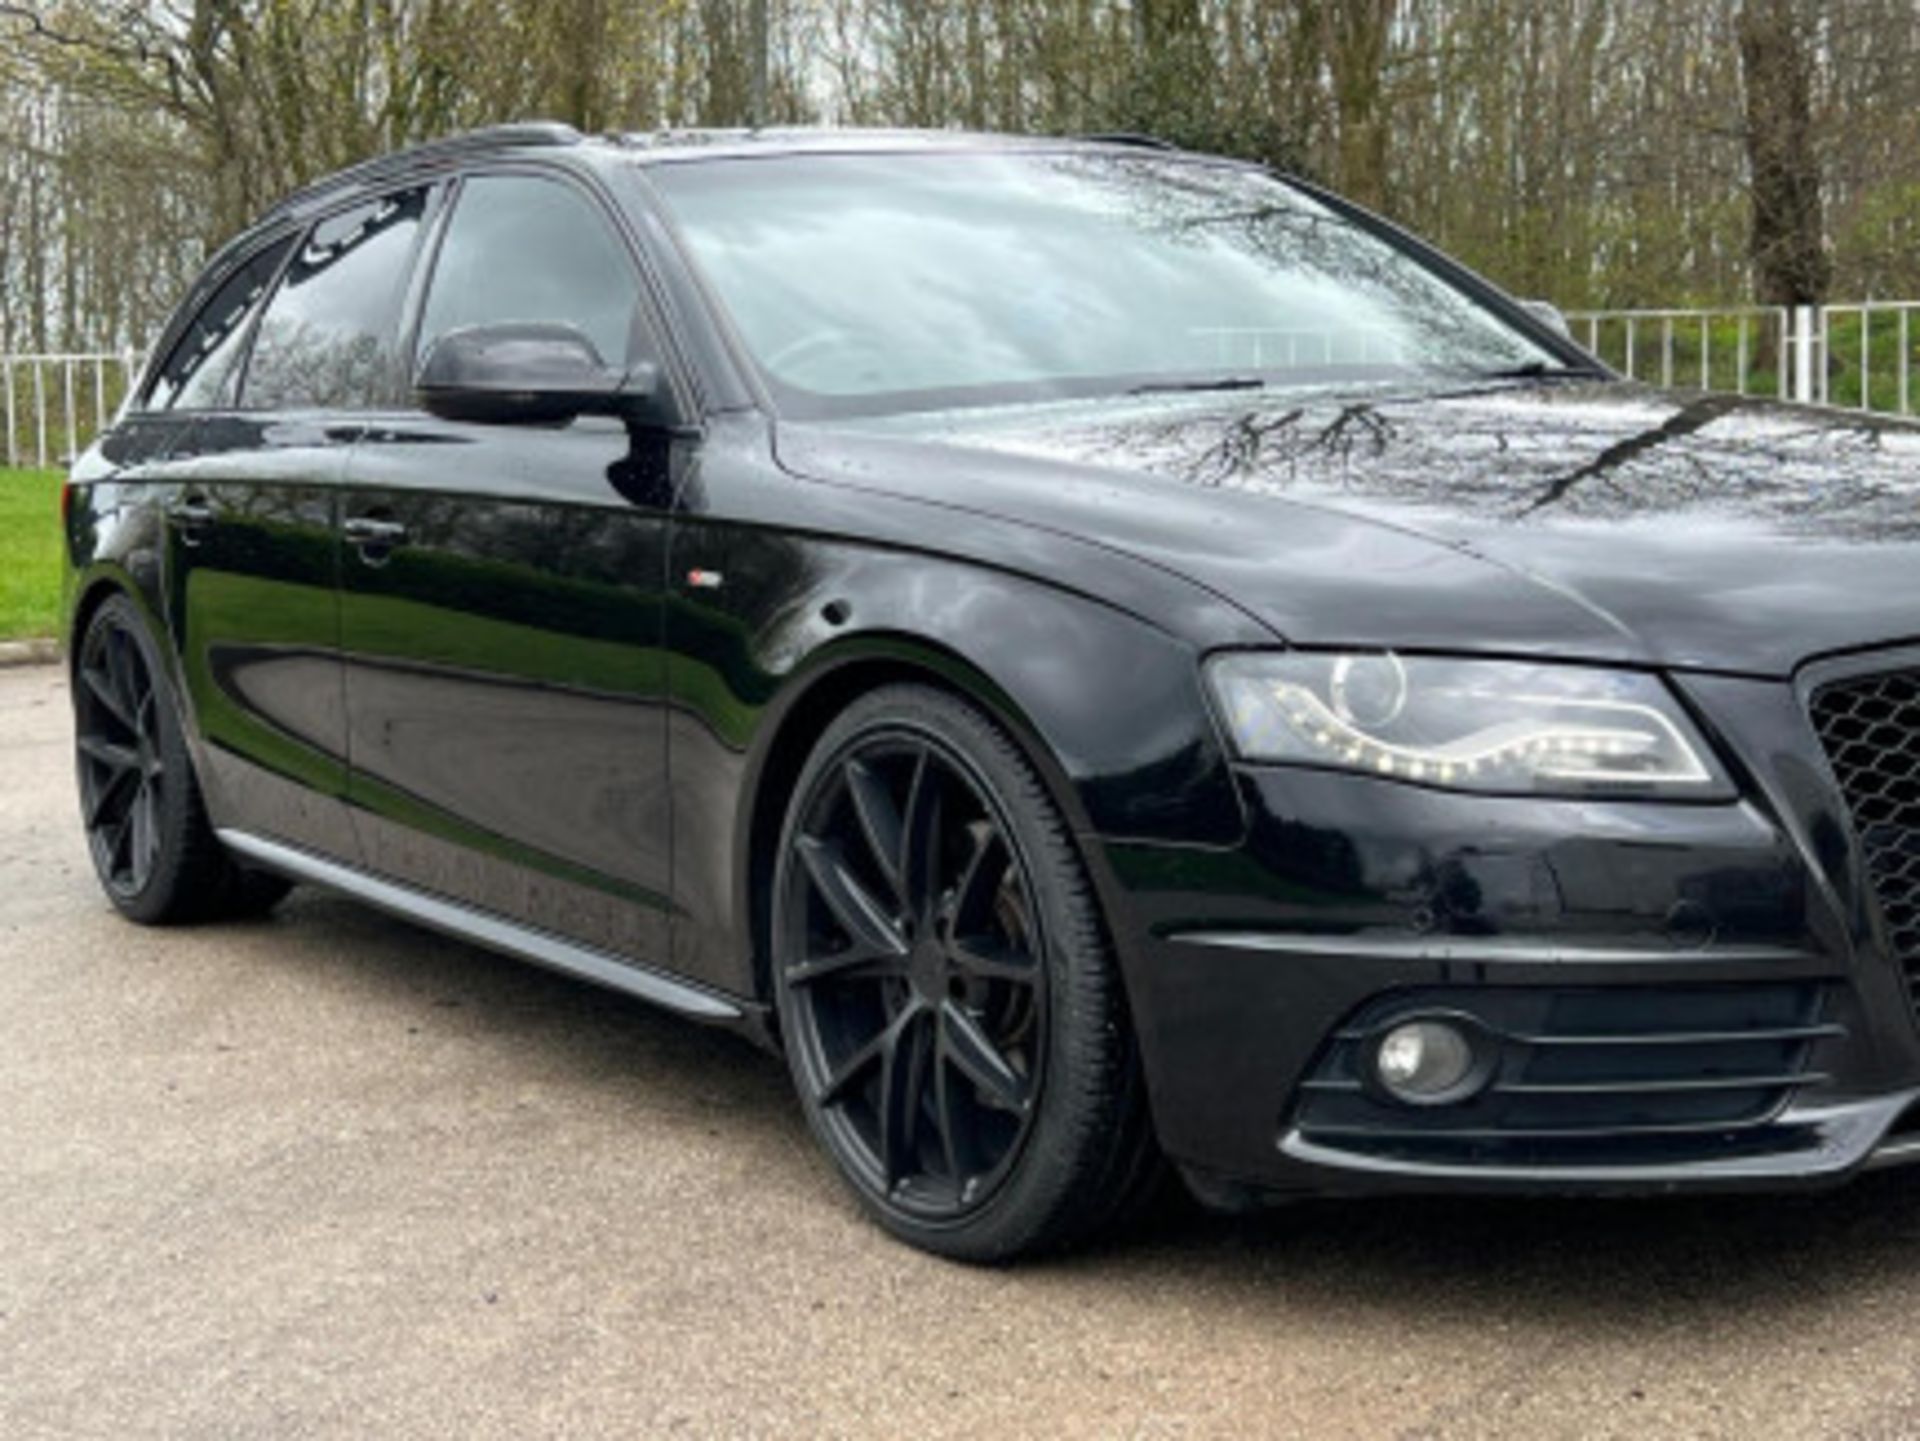 2010 AUDI A4 AVANT 2.0 TFSI S LINE SPECIAL EDITION S TRONIC QUATTRO >>--NO VAT ON HAMMER--<< - Image 46 of 115